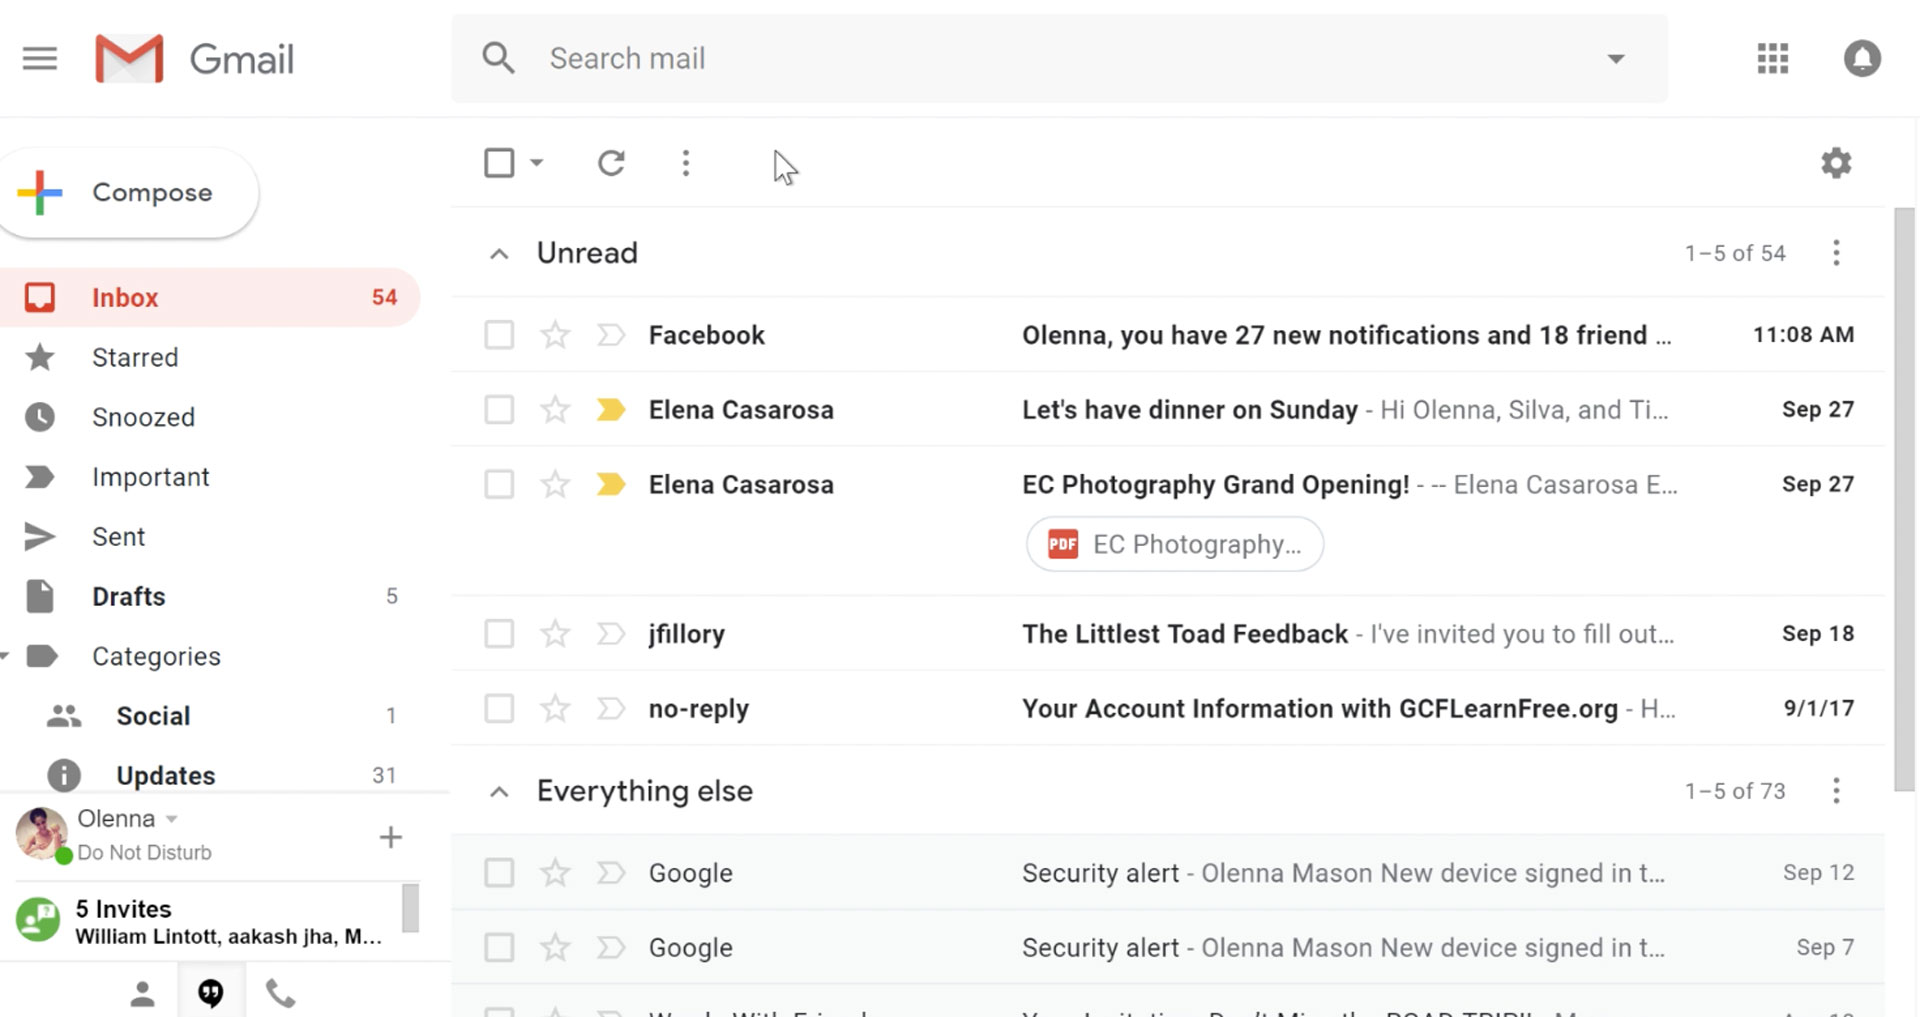 gmail eMail client